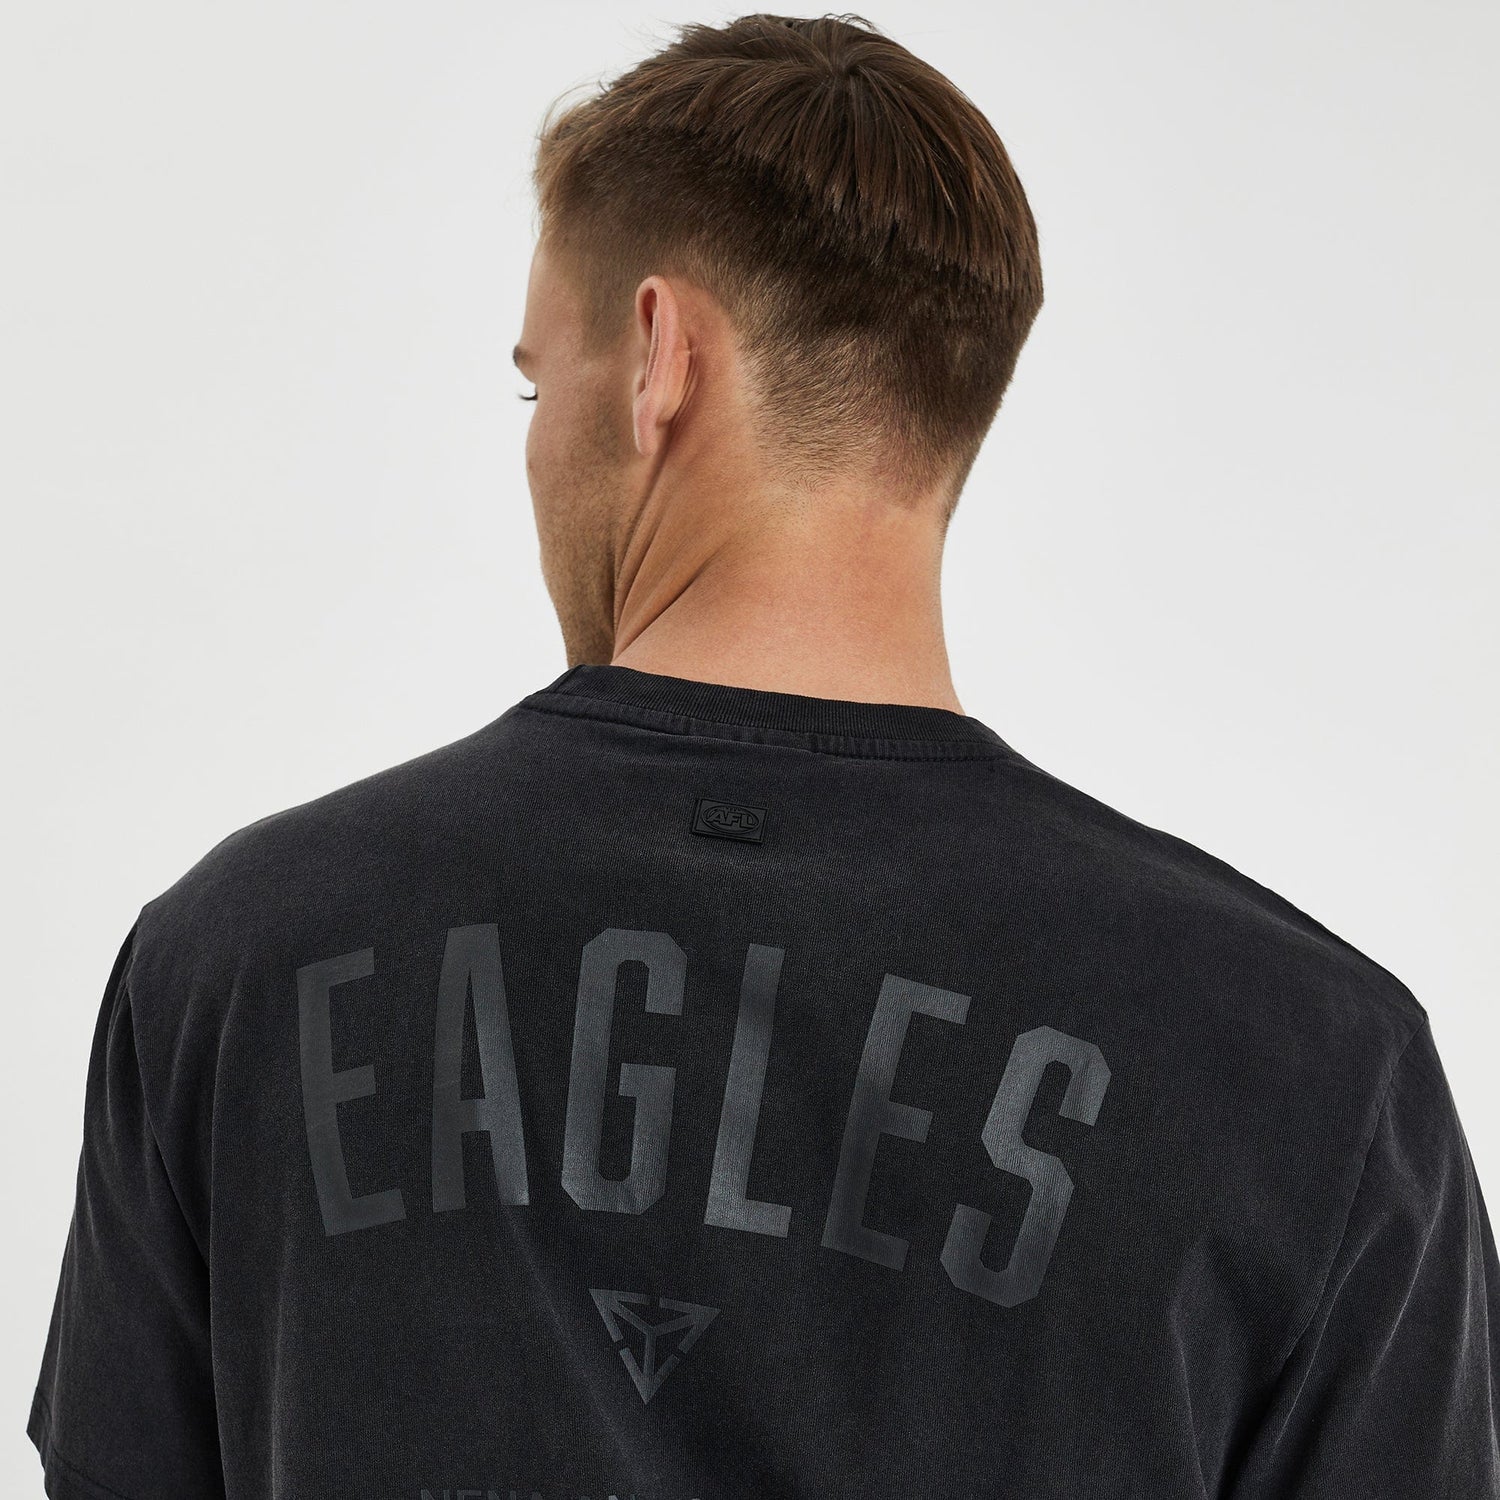 West Coast Eagles Relaxed Fit T-Shirt Mineral Black